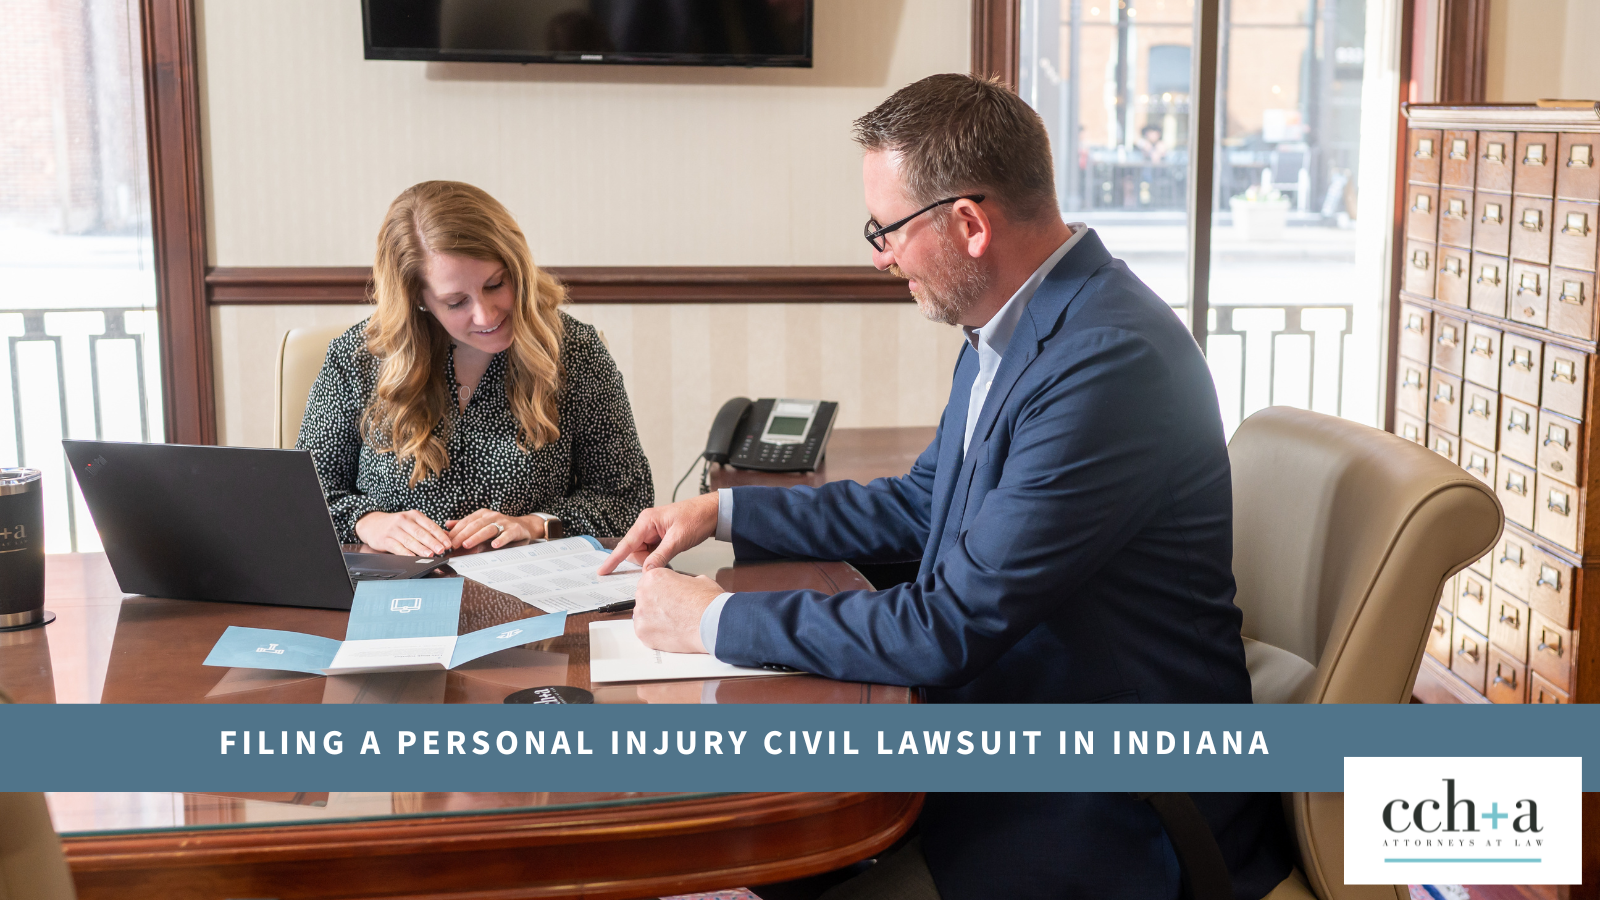 Personal injury attorneys filing a civil lawsuit